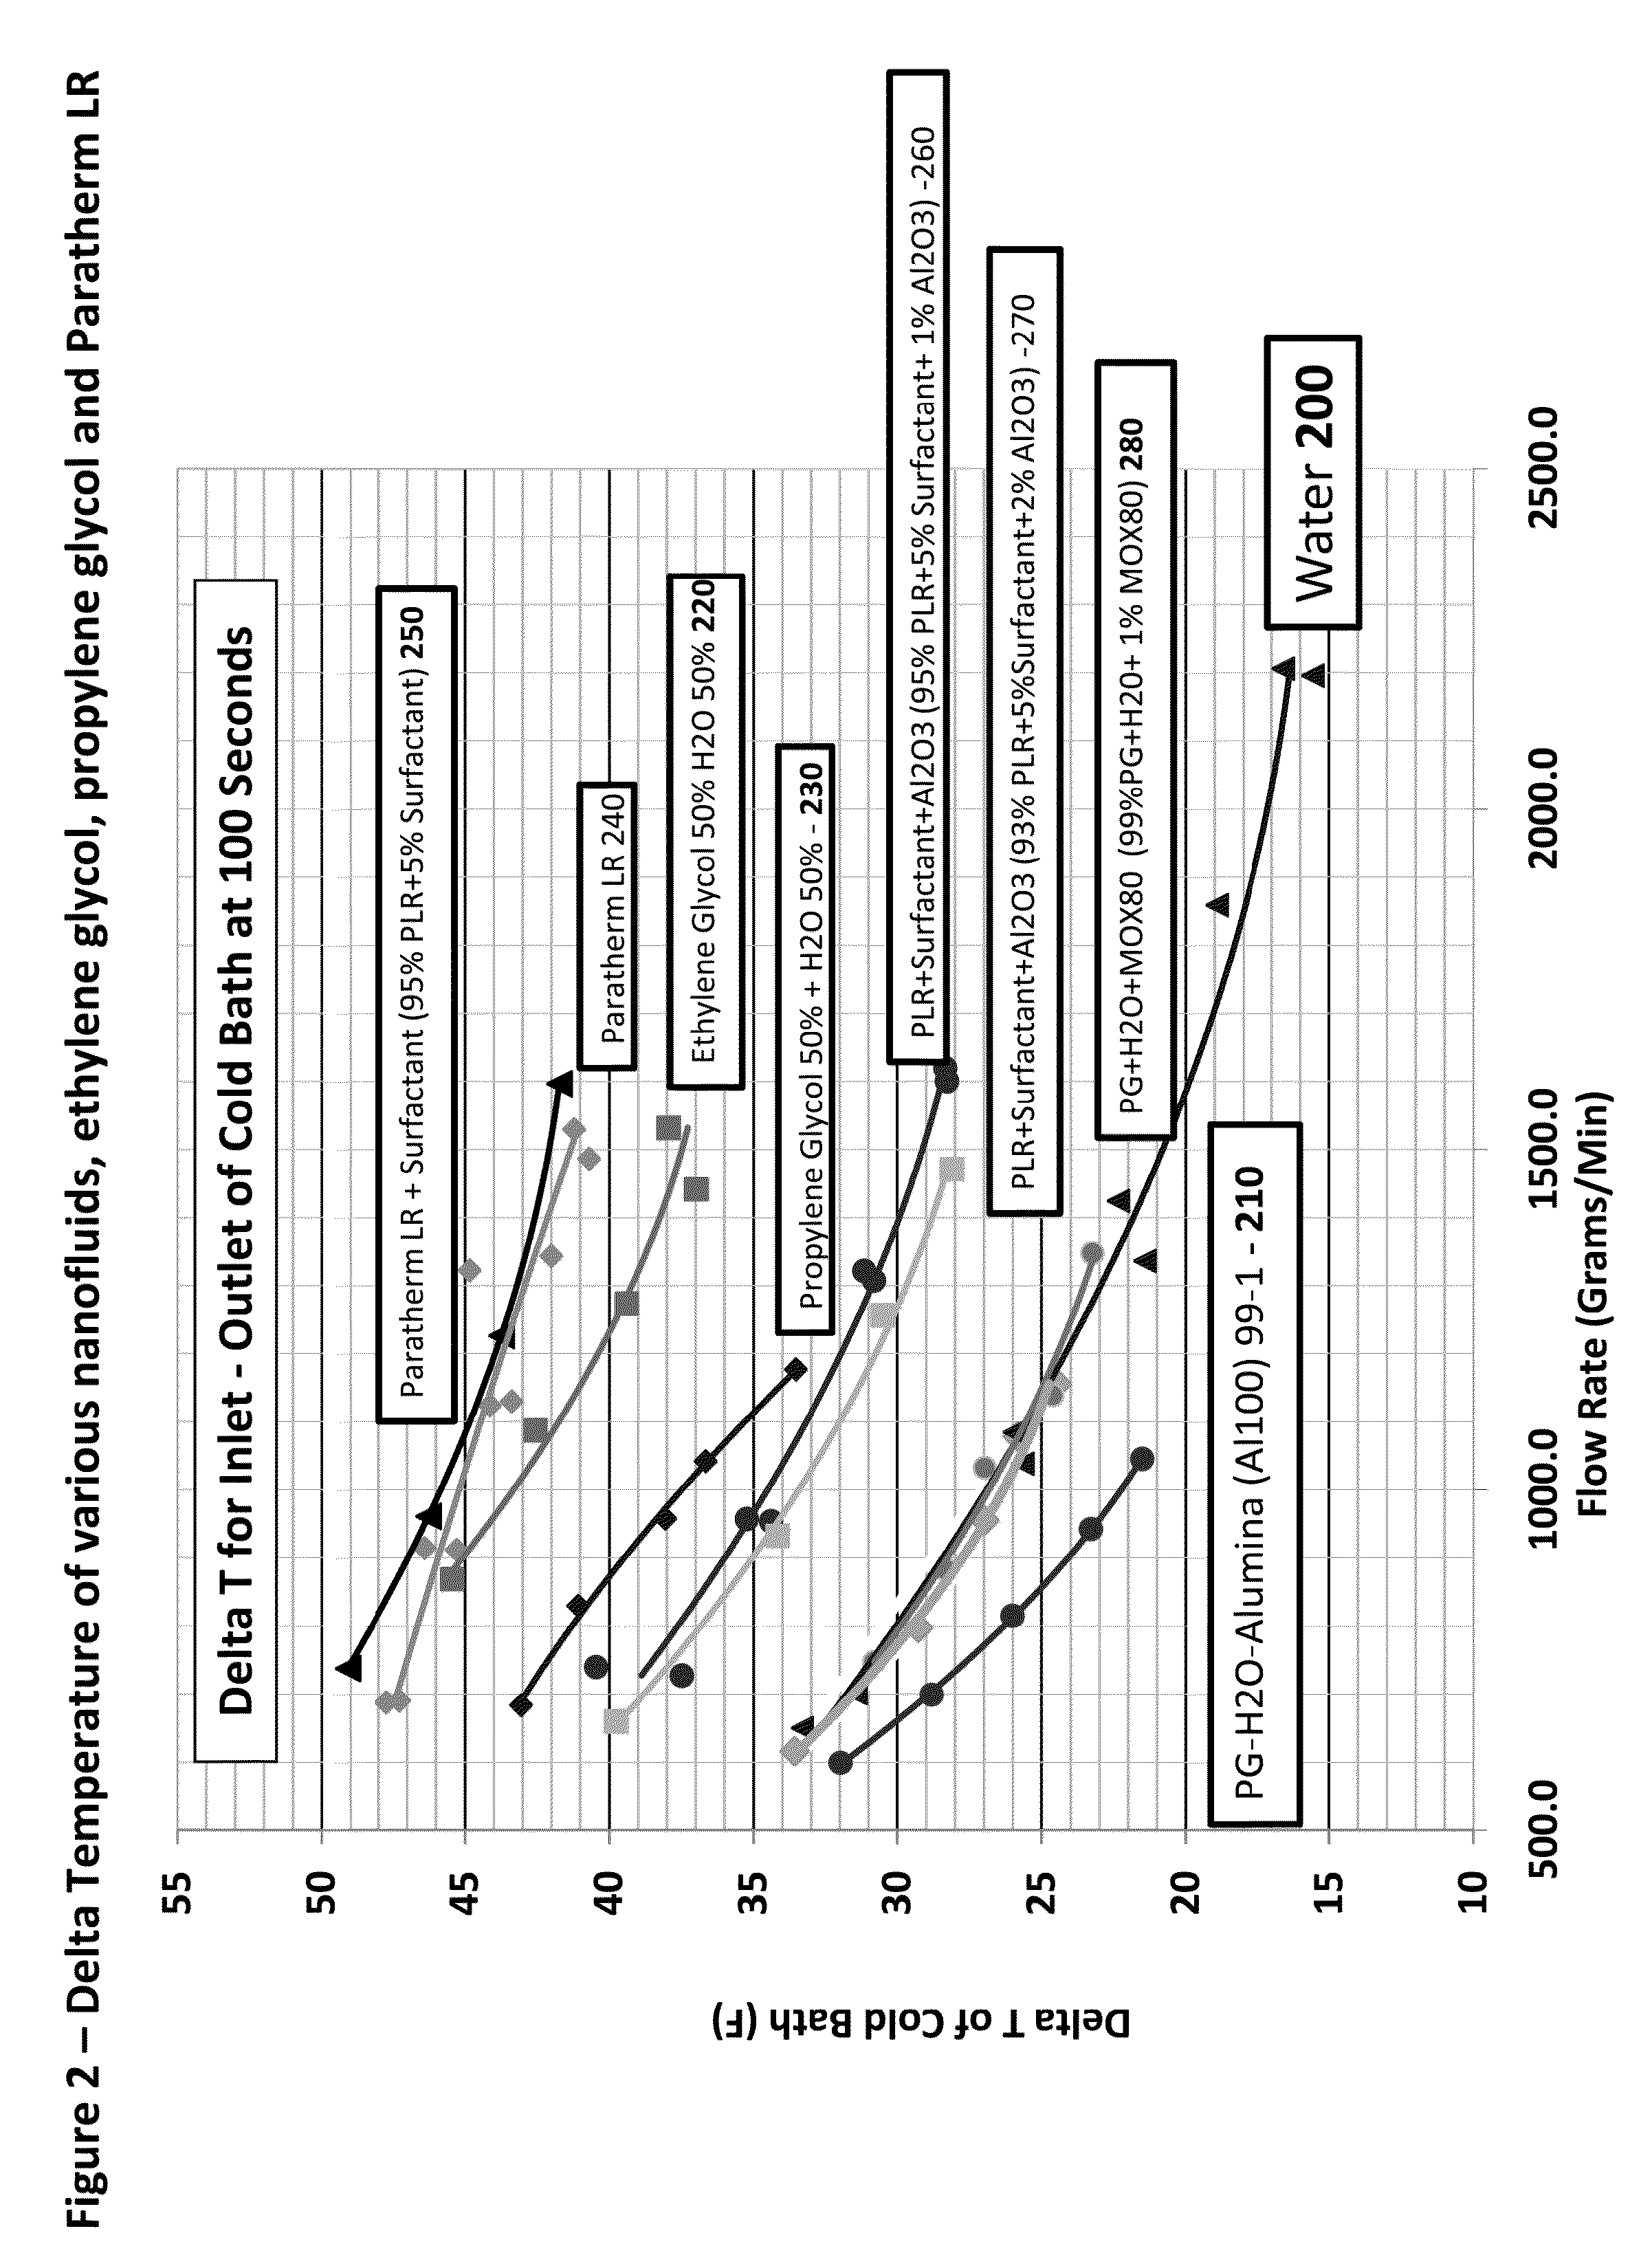 Method of making nanaofluids for ground souce heat pumps and other applications